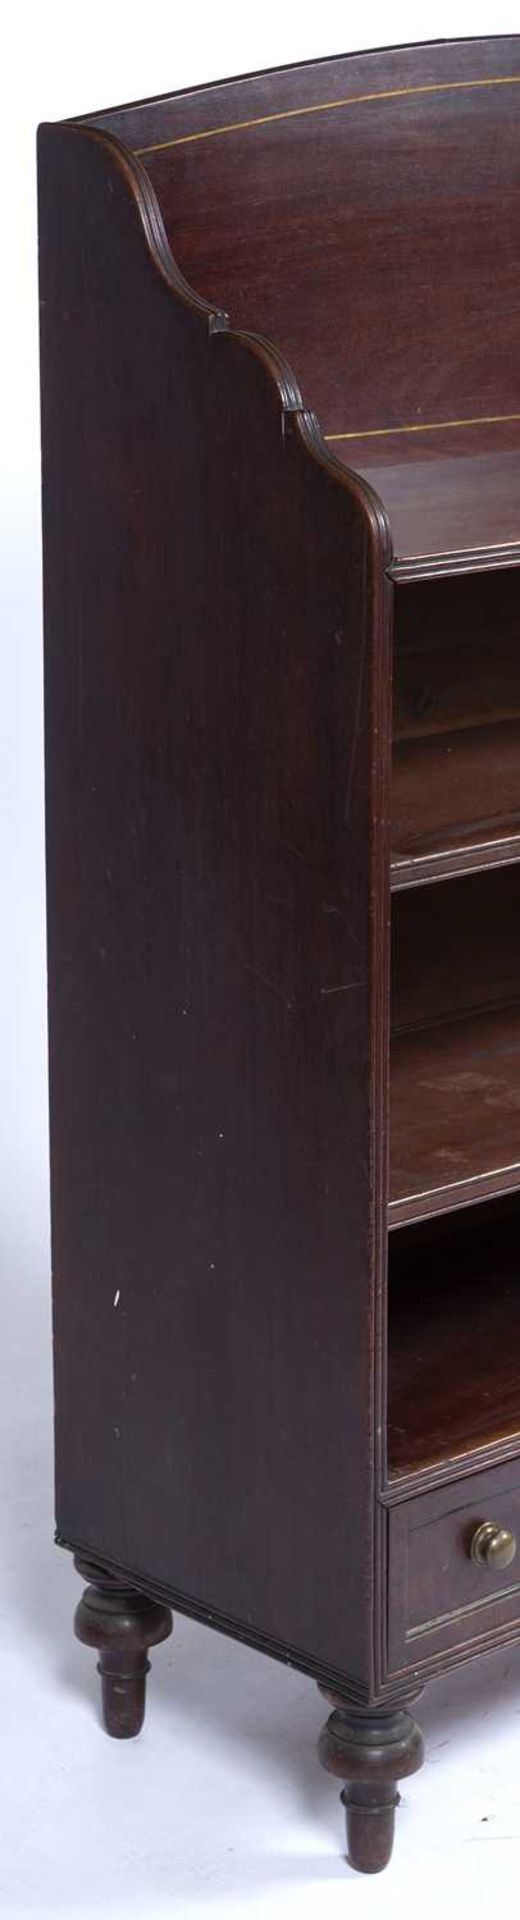 Mahogany and brass inlaid open bookcase 19th Century, fitted with two drawers, and with a shaped - Image 3 of 4